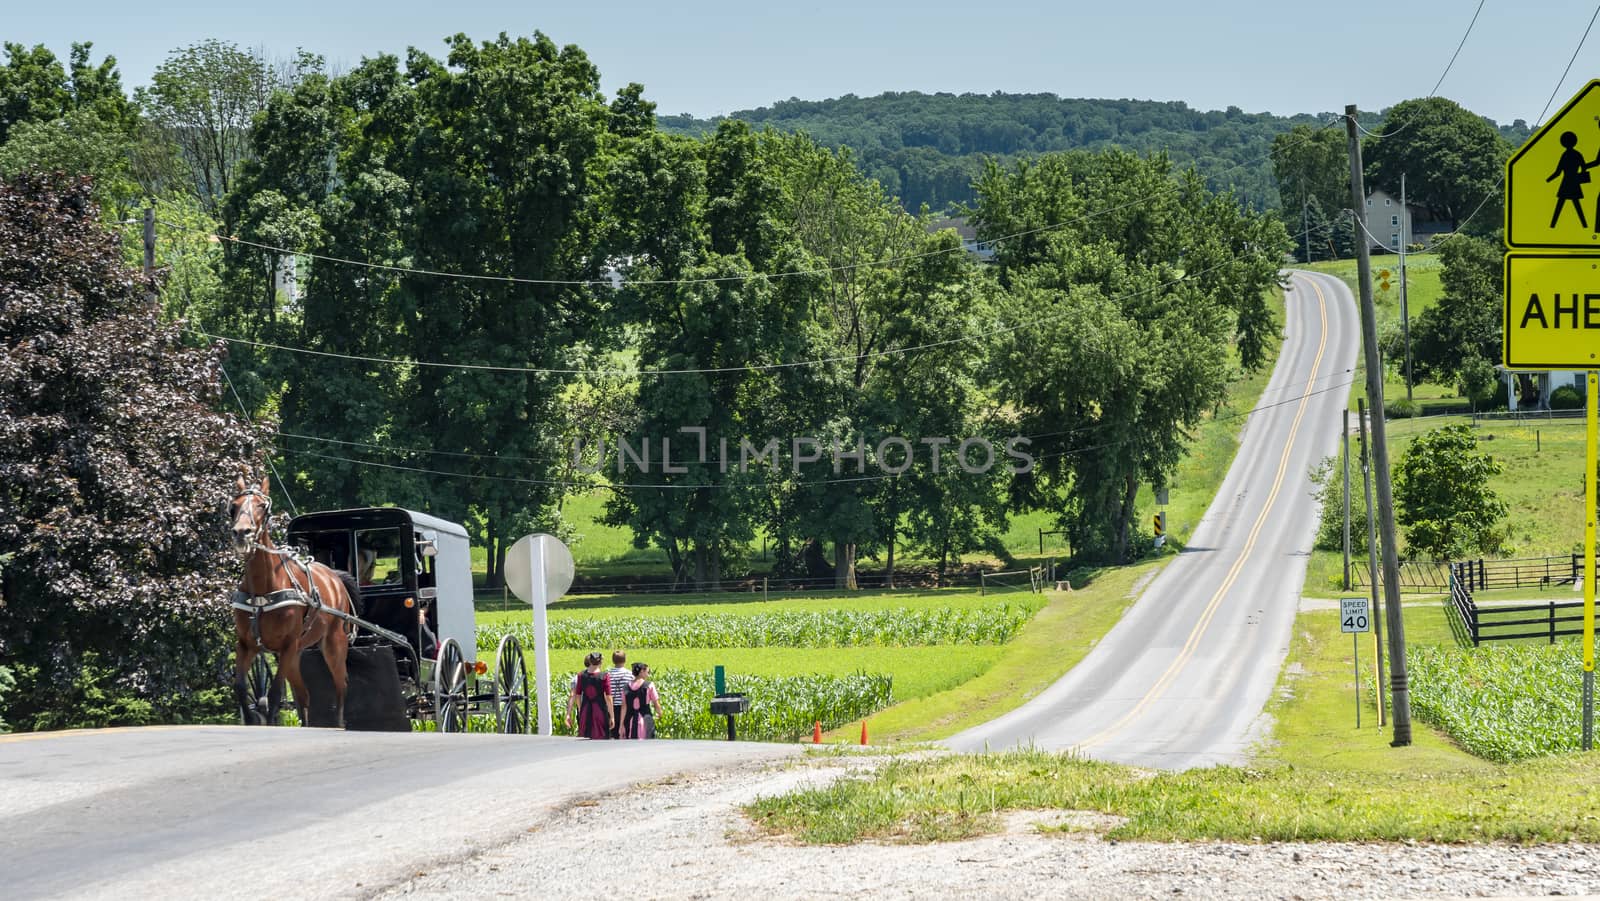 Amish Teenagers Walking Along Train Tracks with a Horse and Buggy Approaching in Countryside on a Sunny Day by actionphoto50